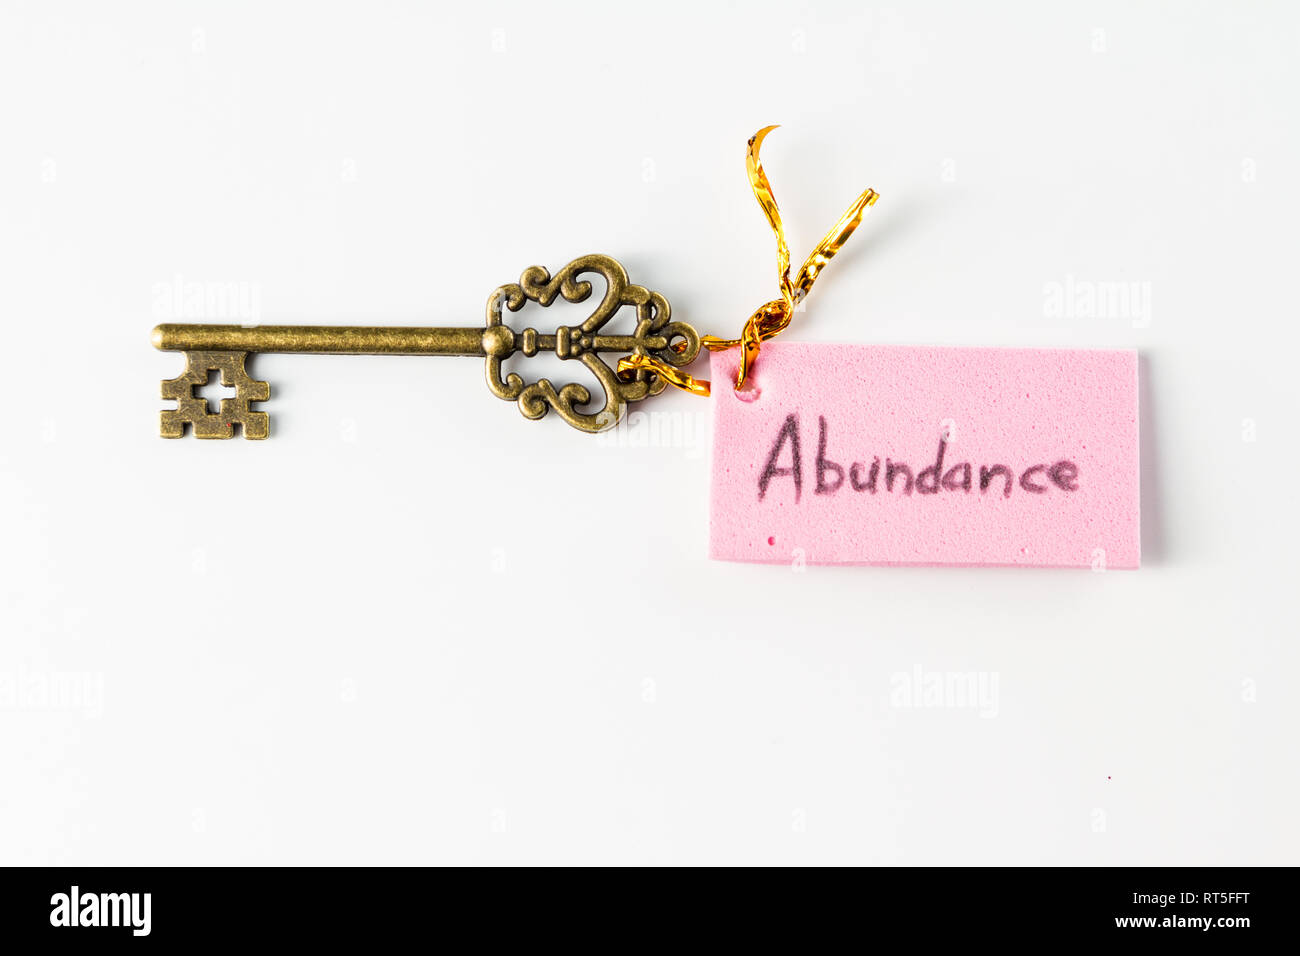 Close up of an ornamental key with the word abundance hand written on a pink tag isolated on a white background Stock Photo